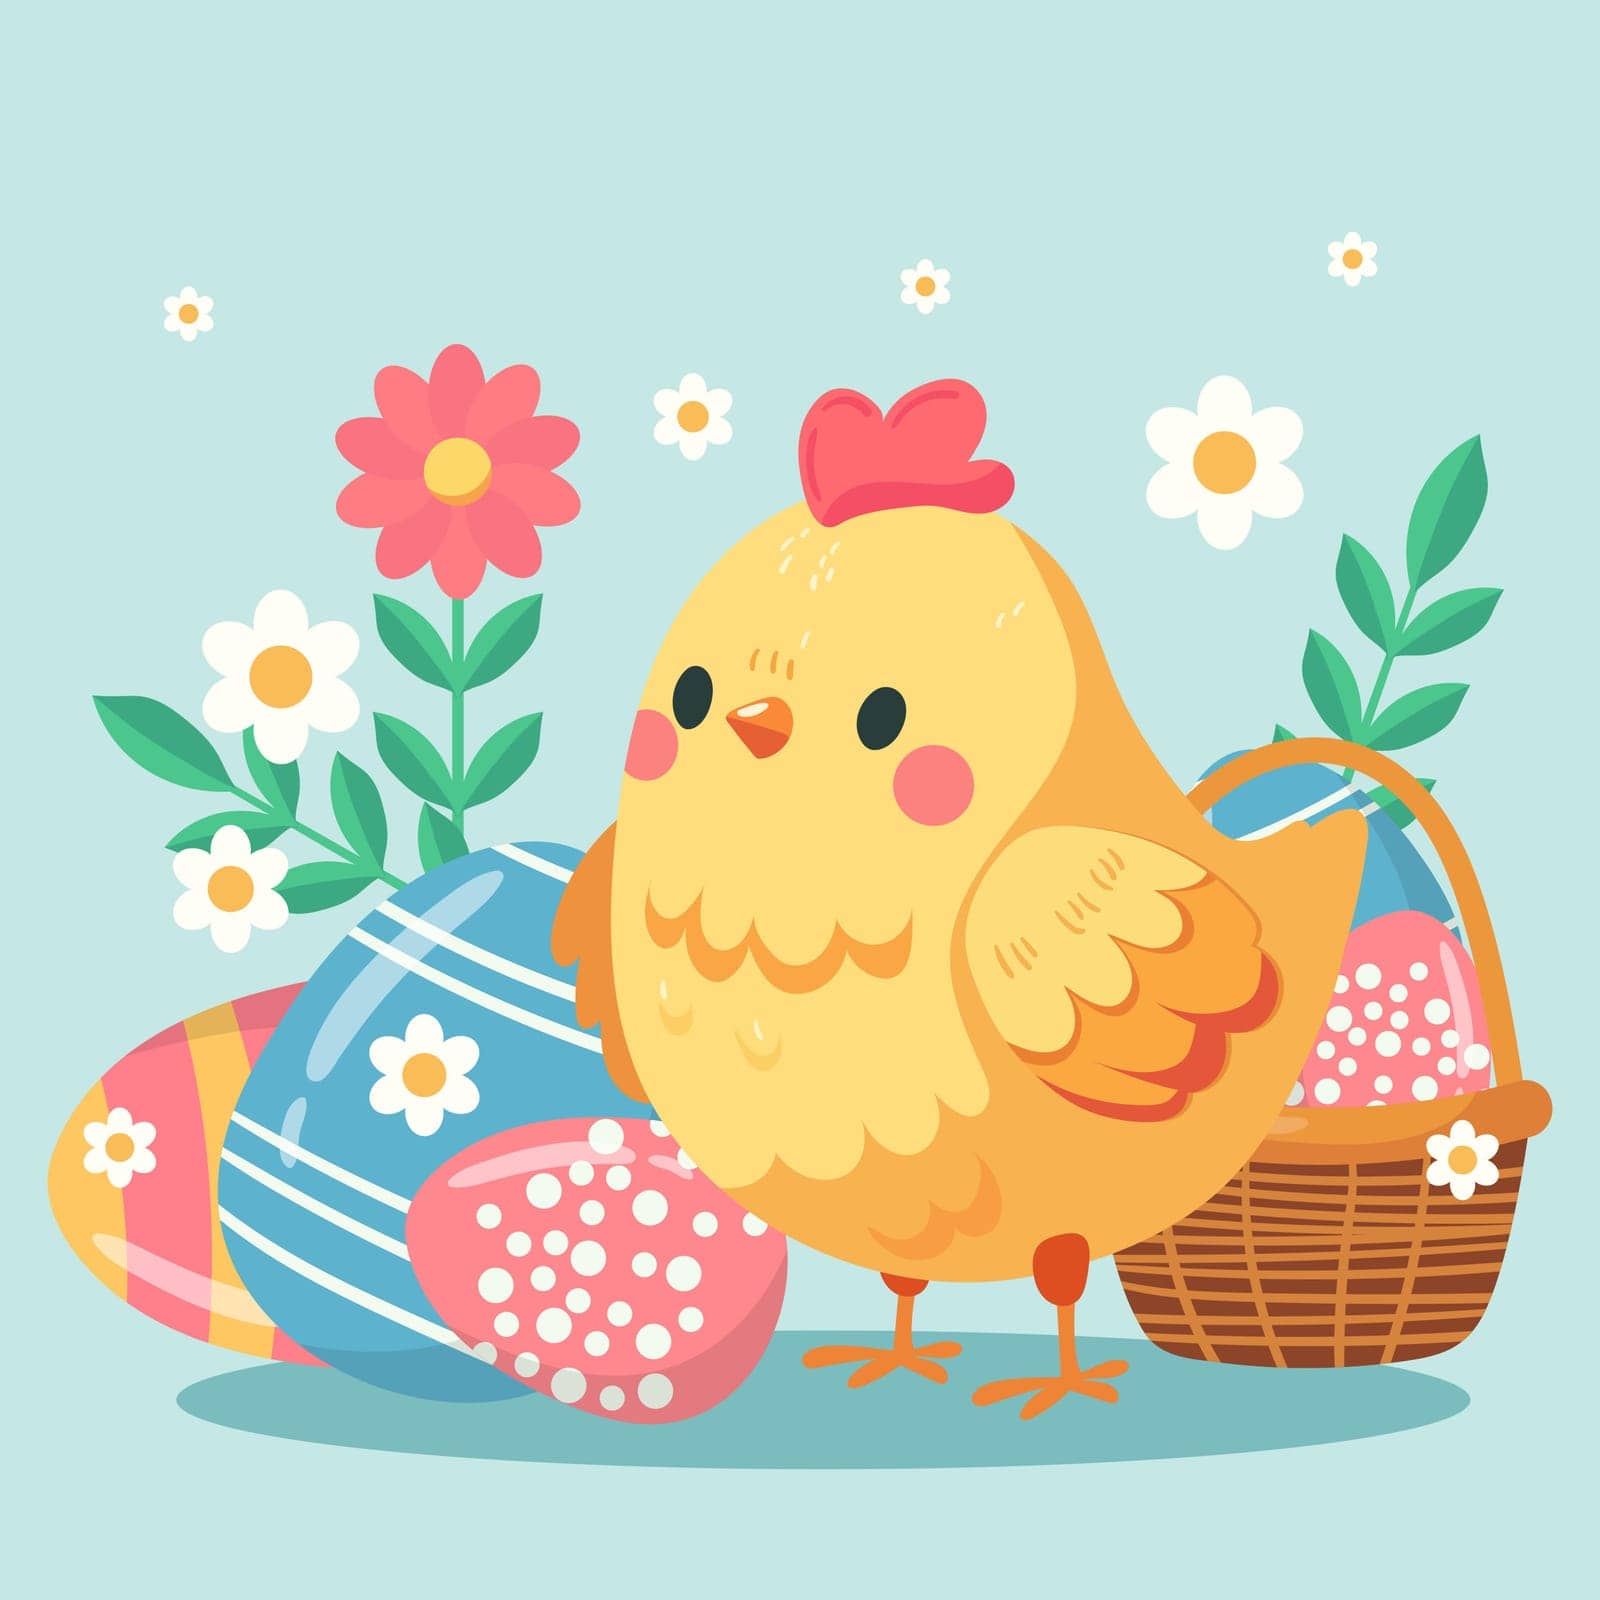 Happy easter card with chicken and eggs flat style. Vector illustration